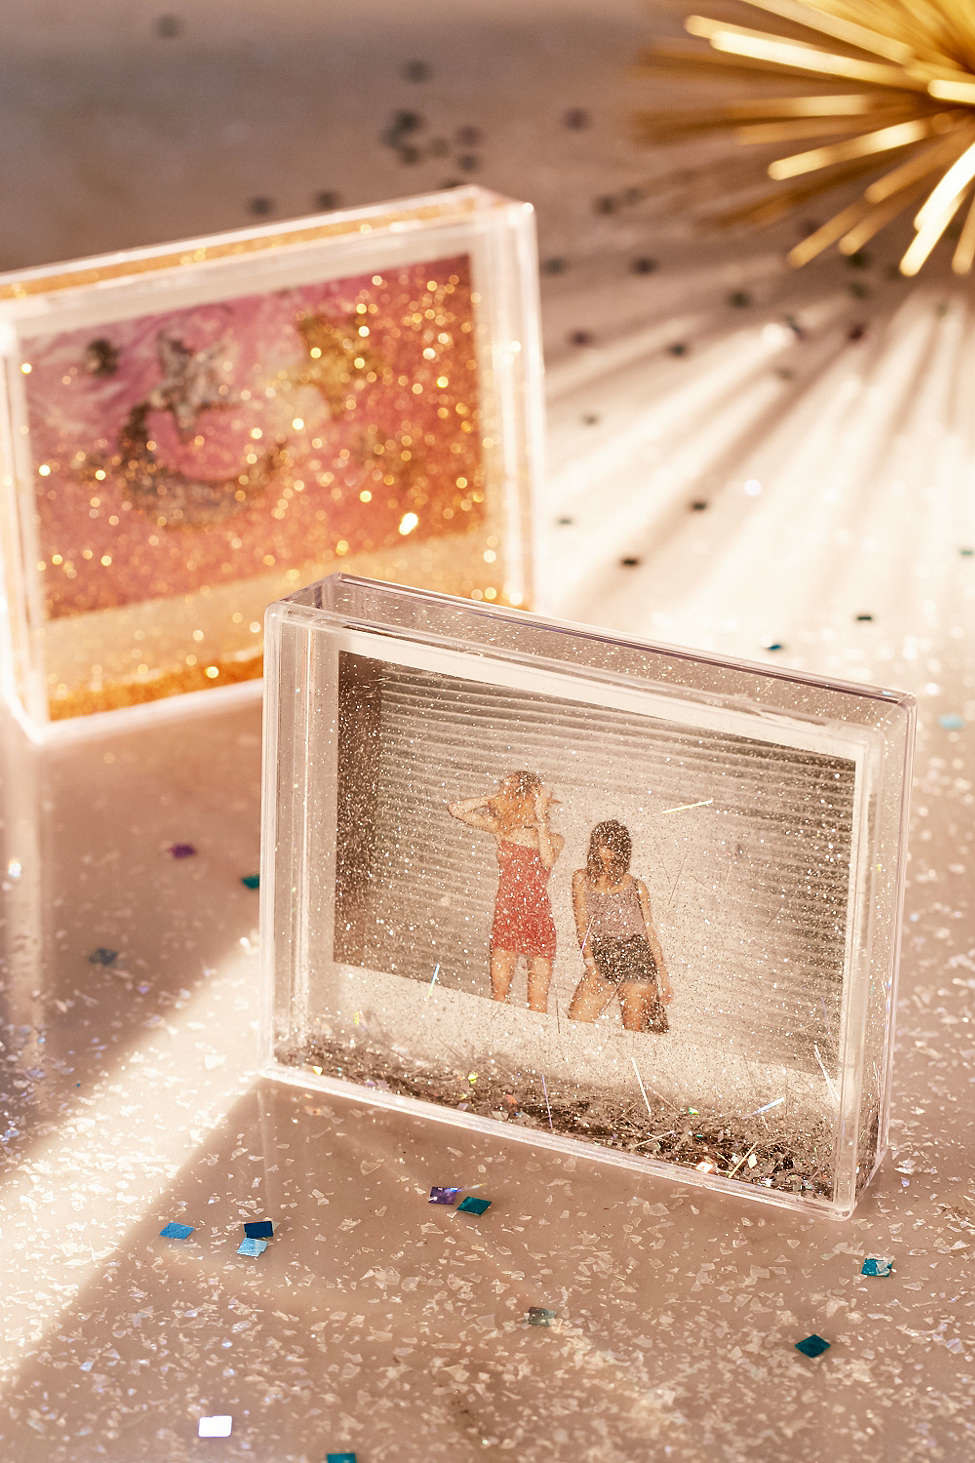 38 Products To Add Some Much-Needed Sparkle To Your Life